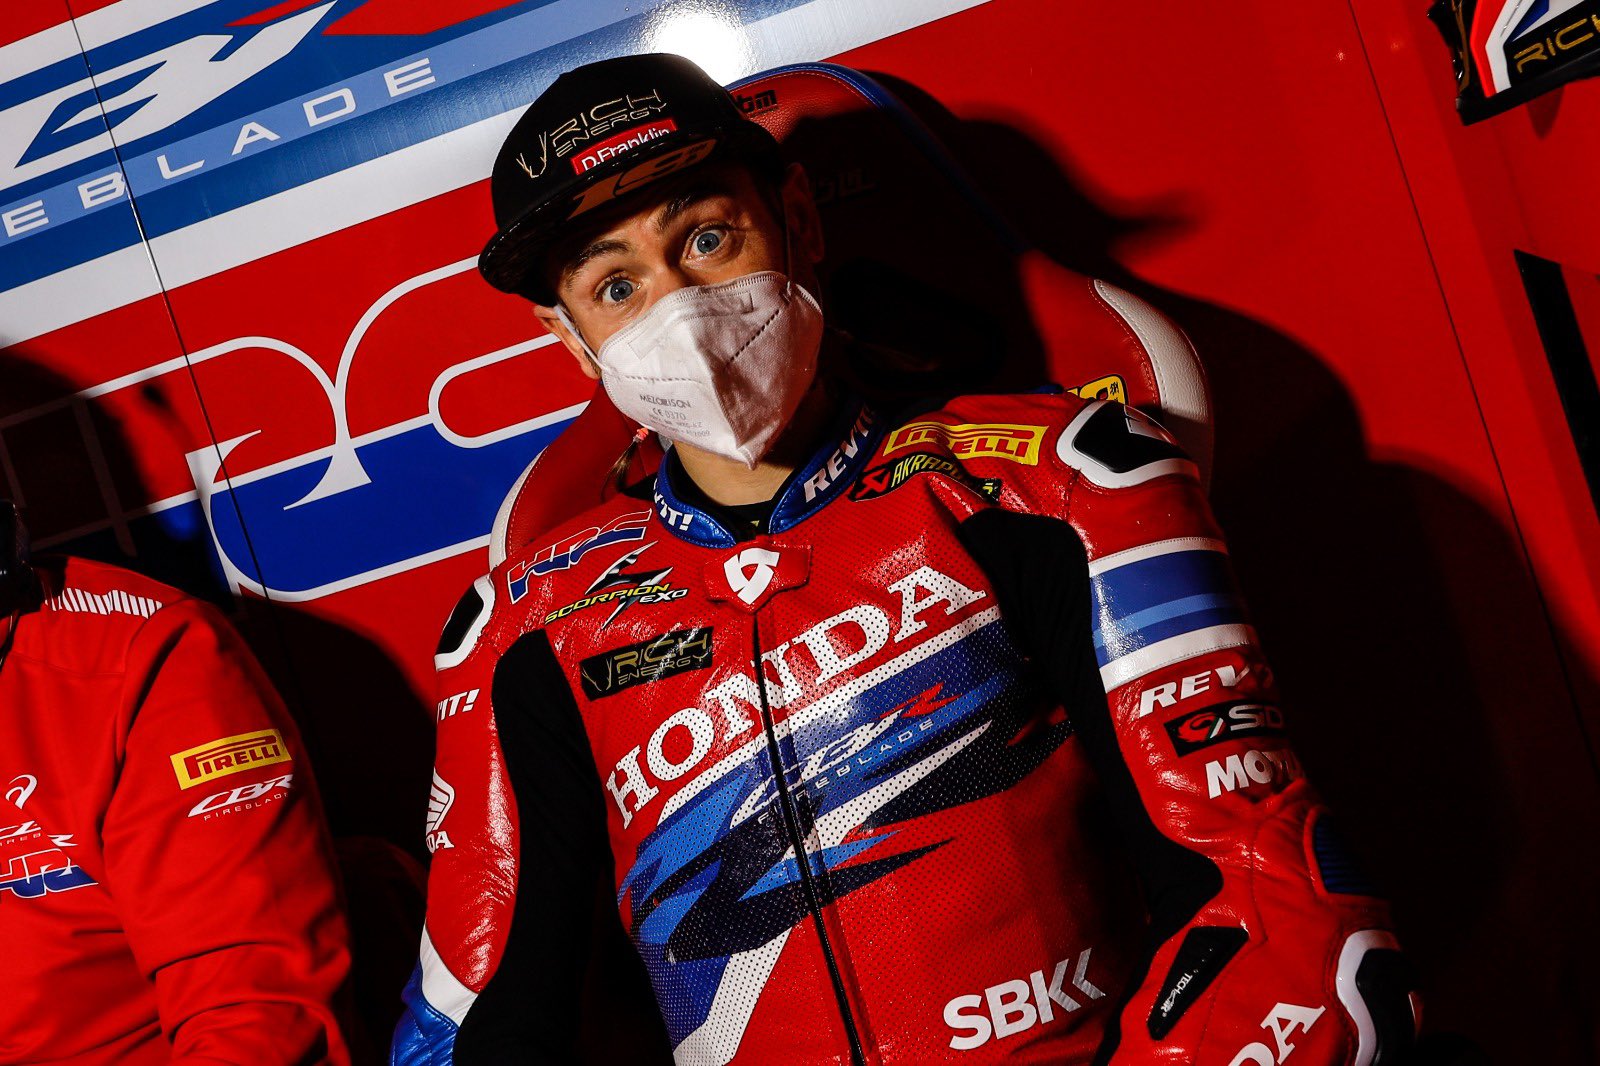 WSBK Superbike 2022: who will want the disappointing Honda after Bautista? Two pilots respond